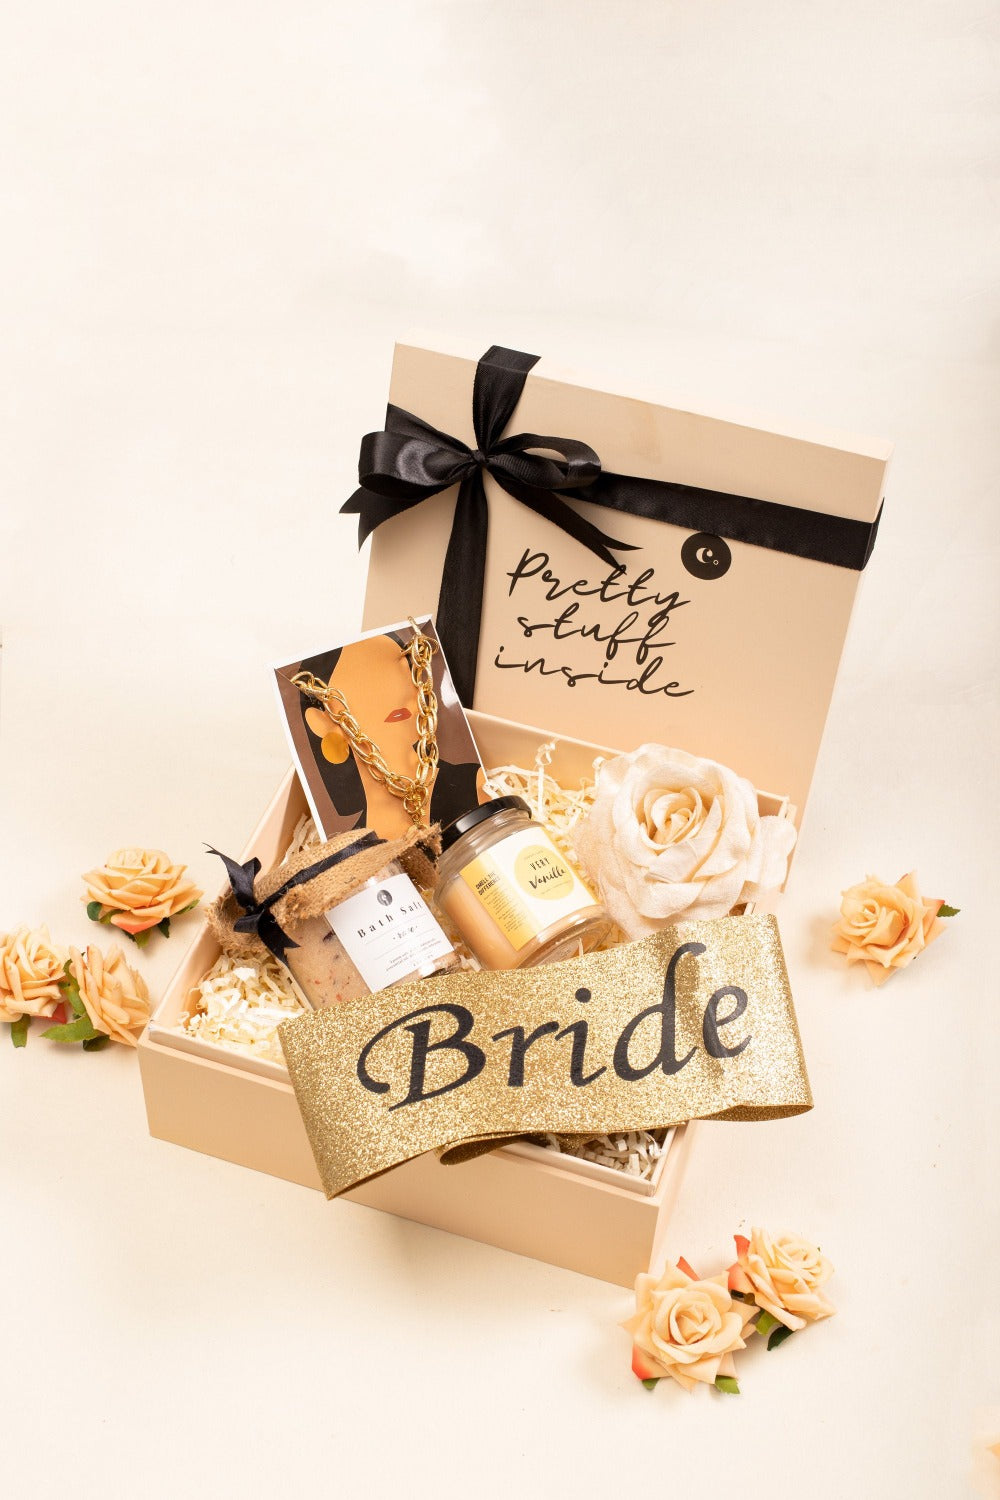 9 Super Thoughtful & Cute Gift Hamper Ideas for Your Bride-to-be